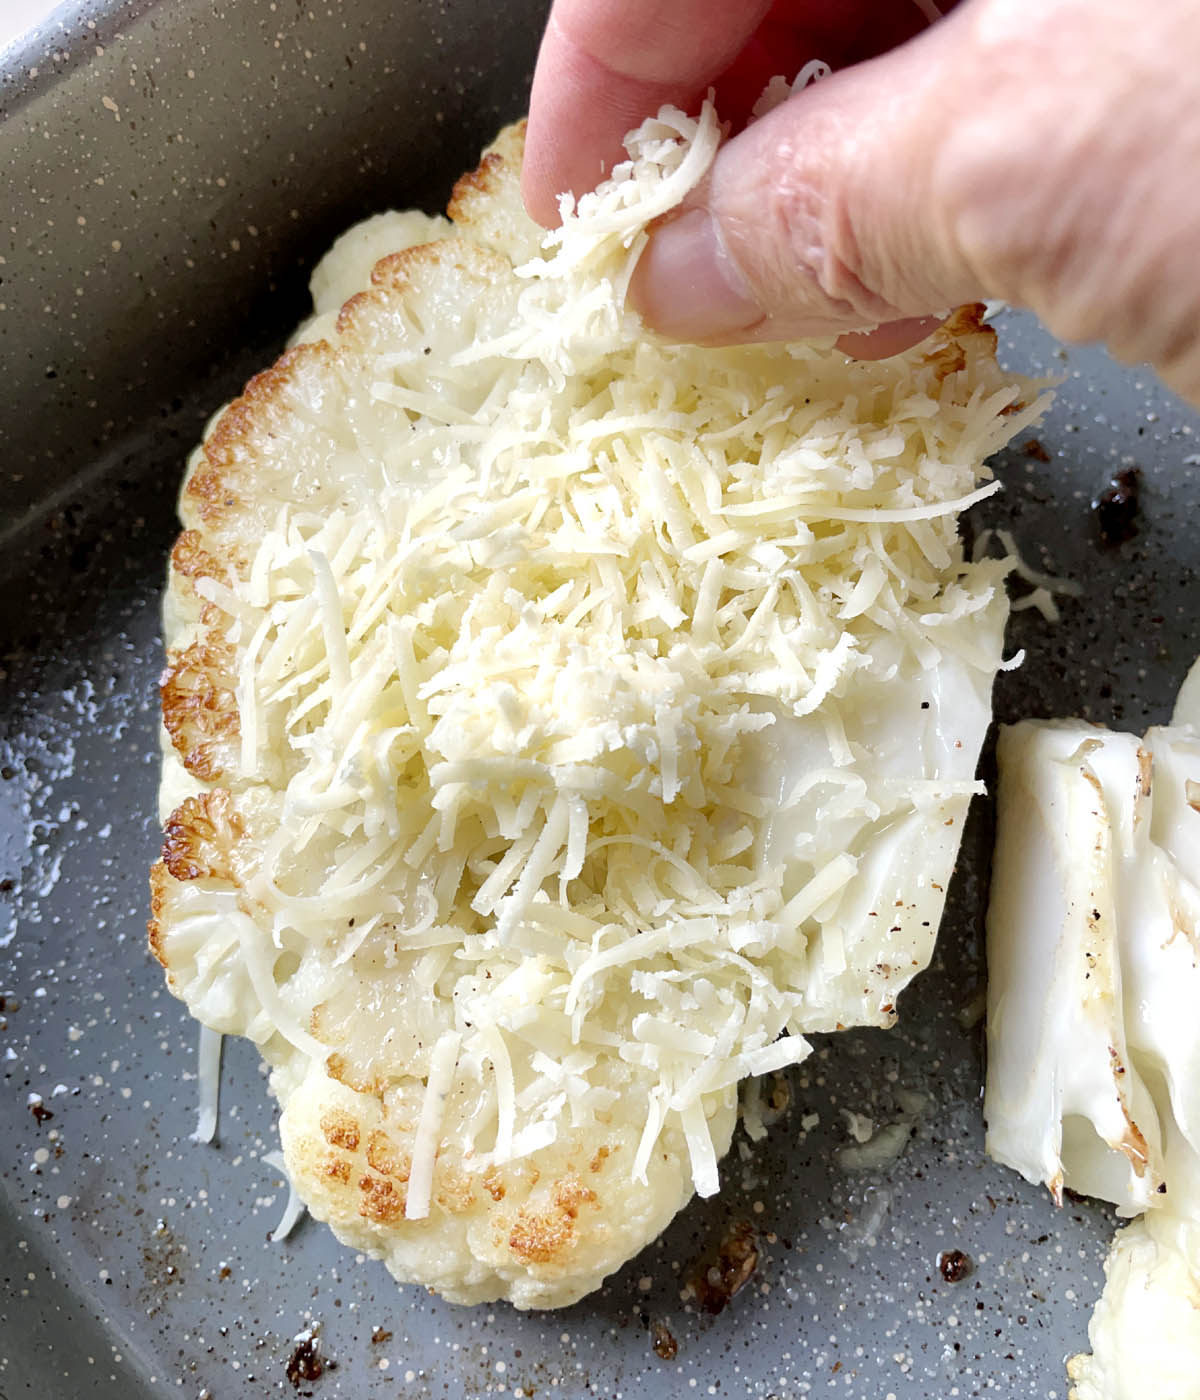 A hand spreading grated parmesan cheese over a cauliflower slice.